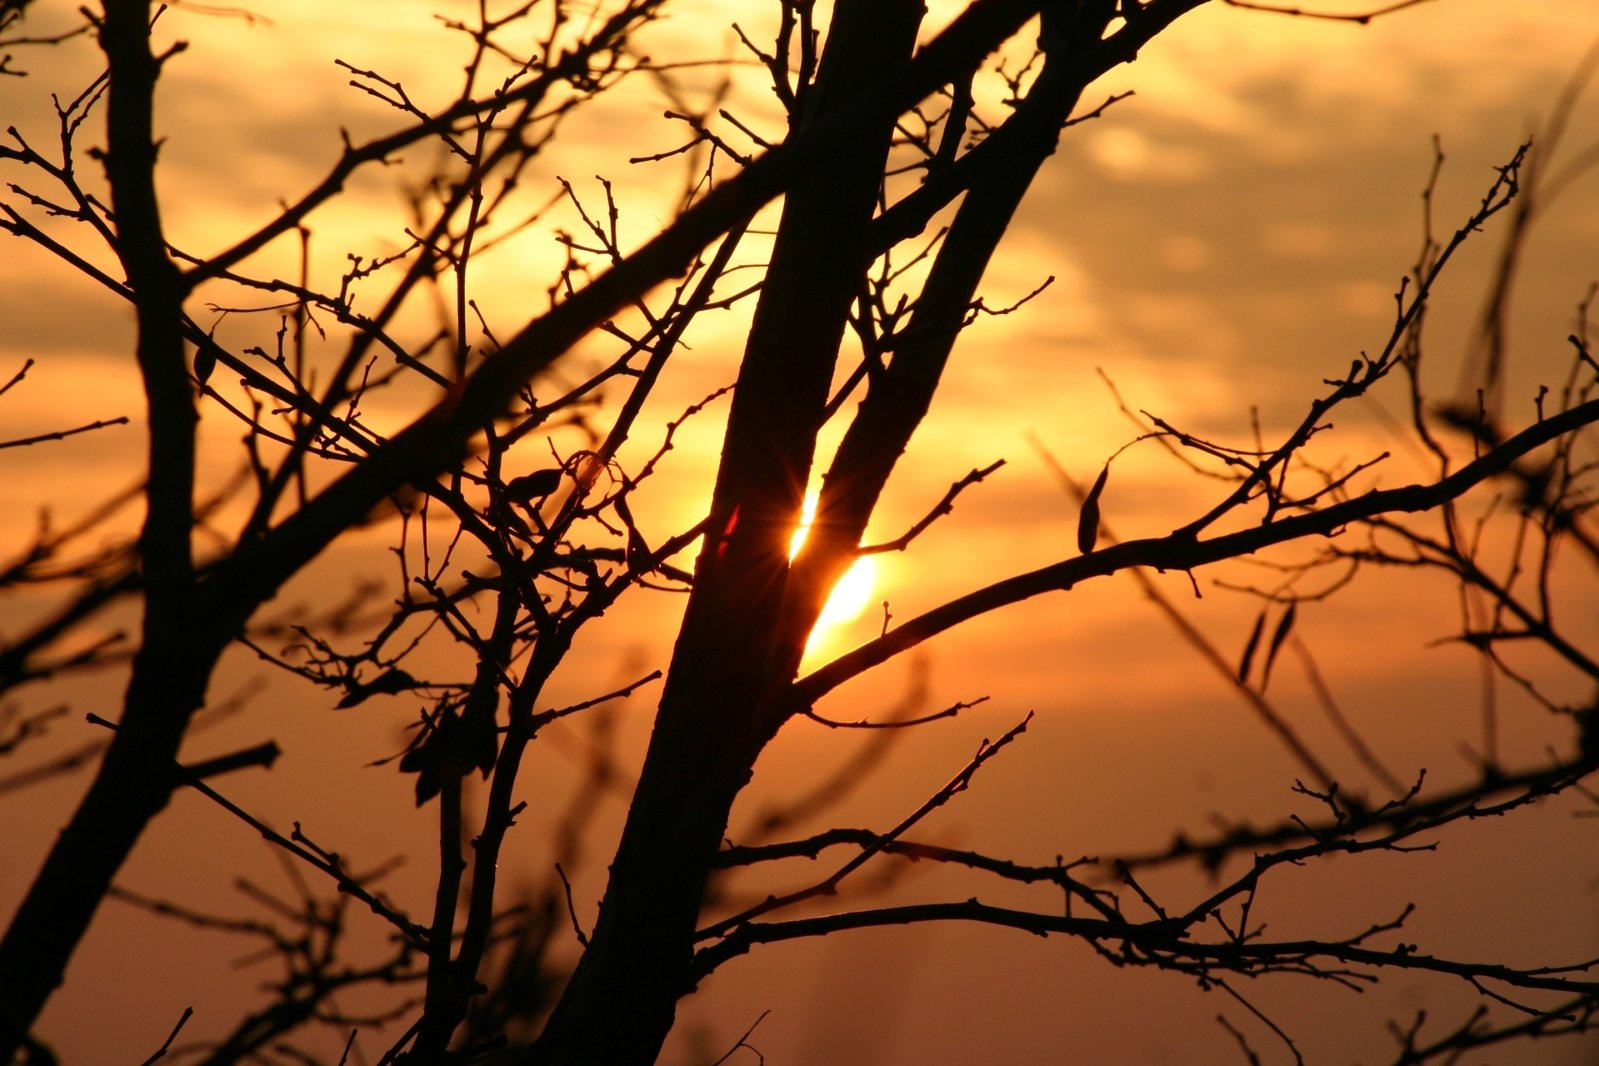 a sunset seen through some leafless tree nches